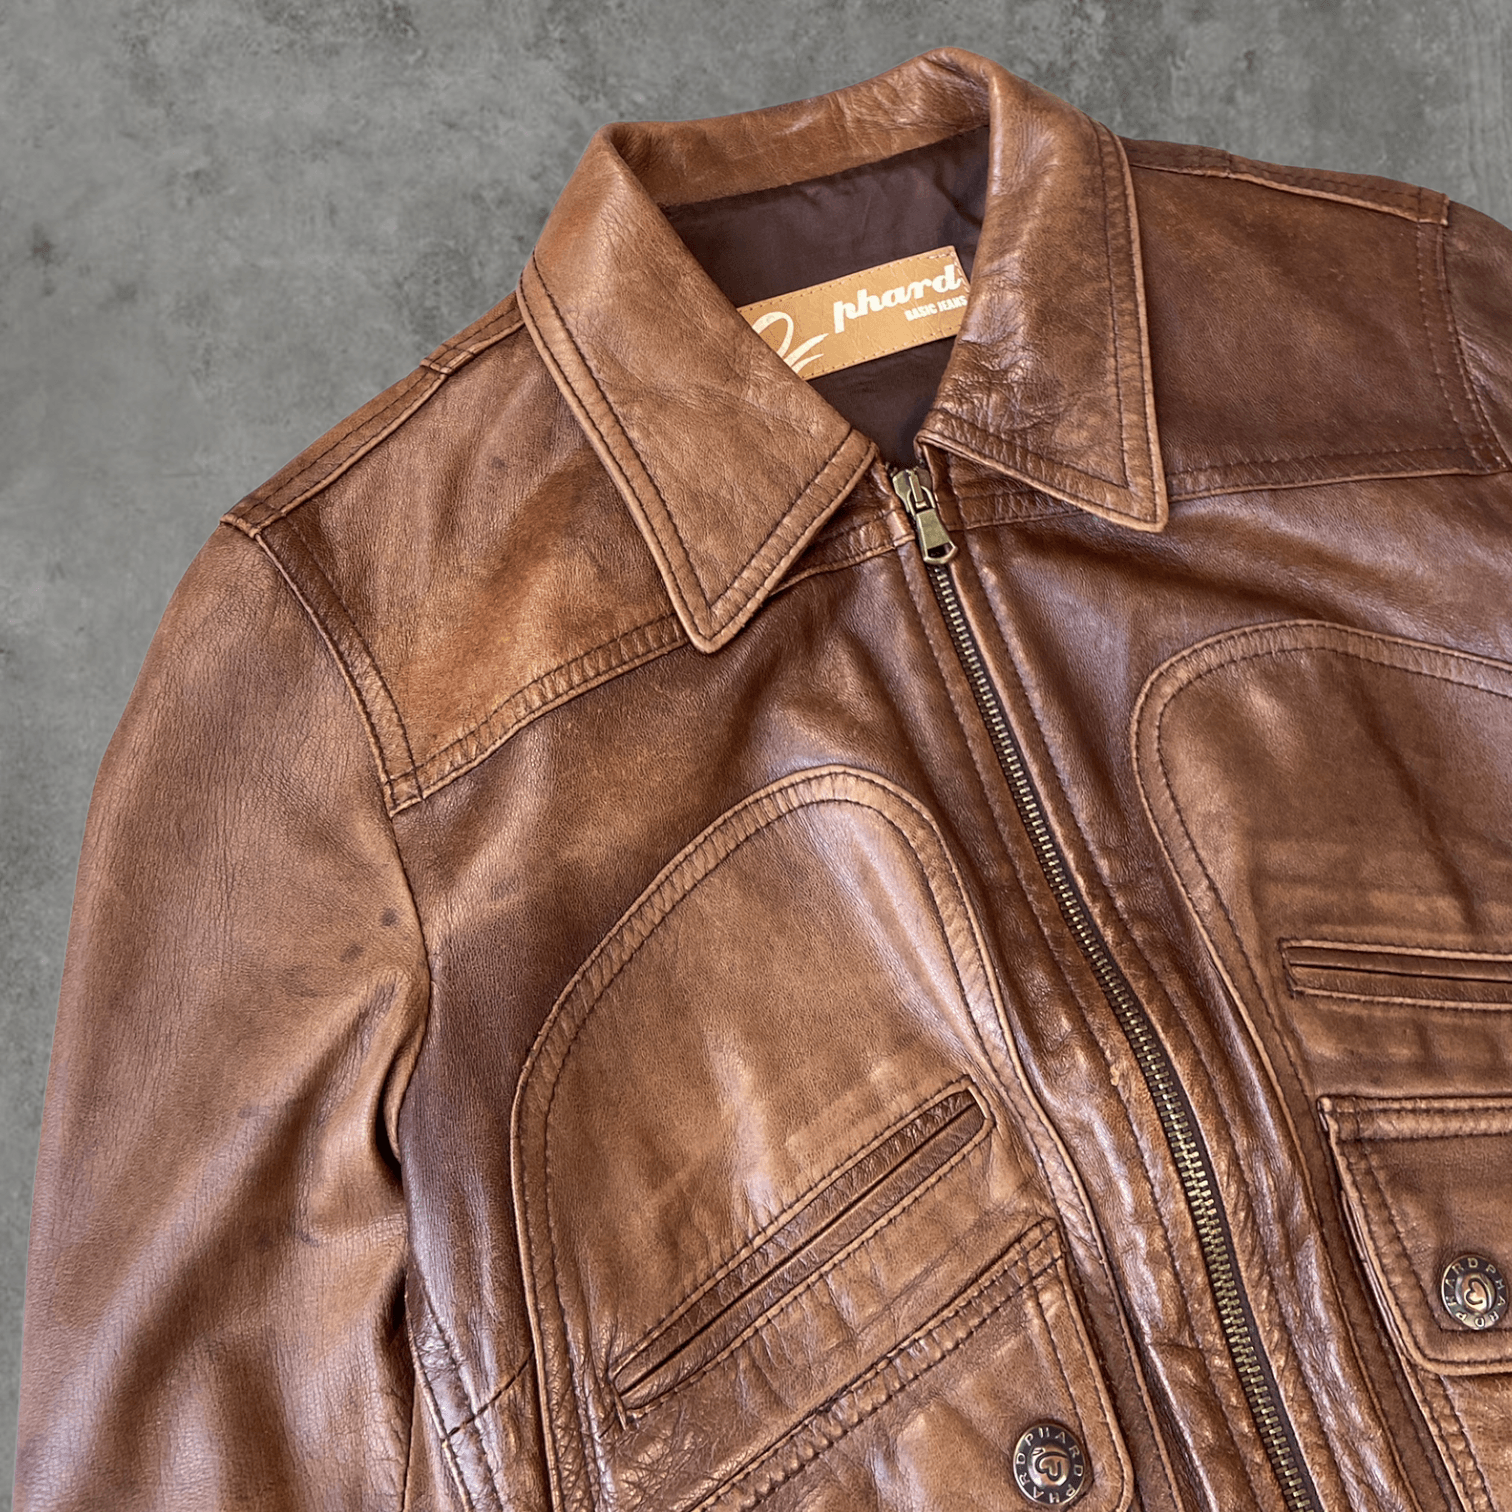 BROWN LEATHER COLLARED JACKET - S - Known Source